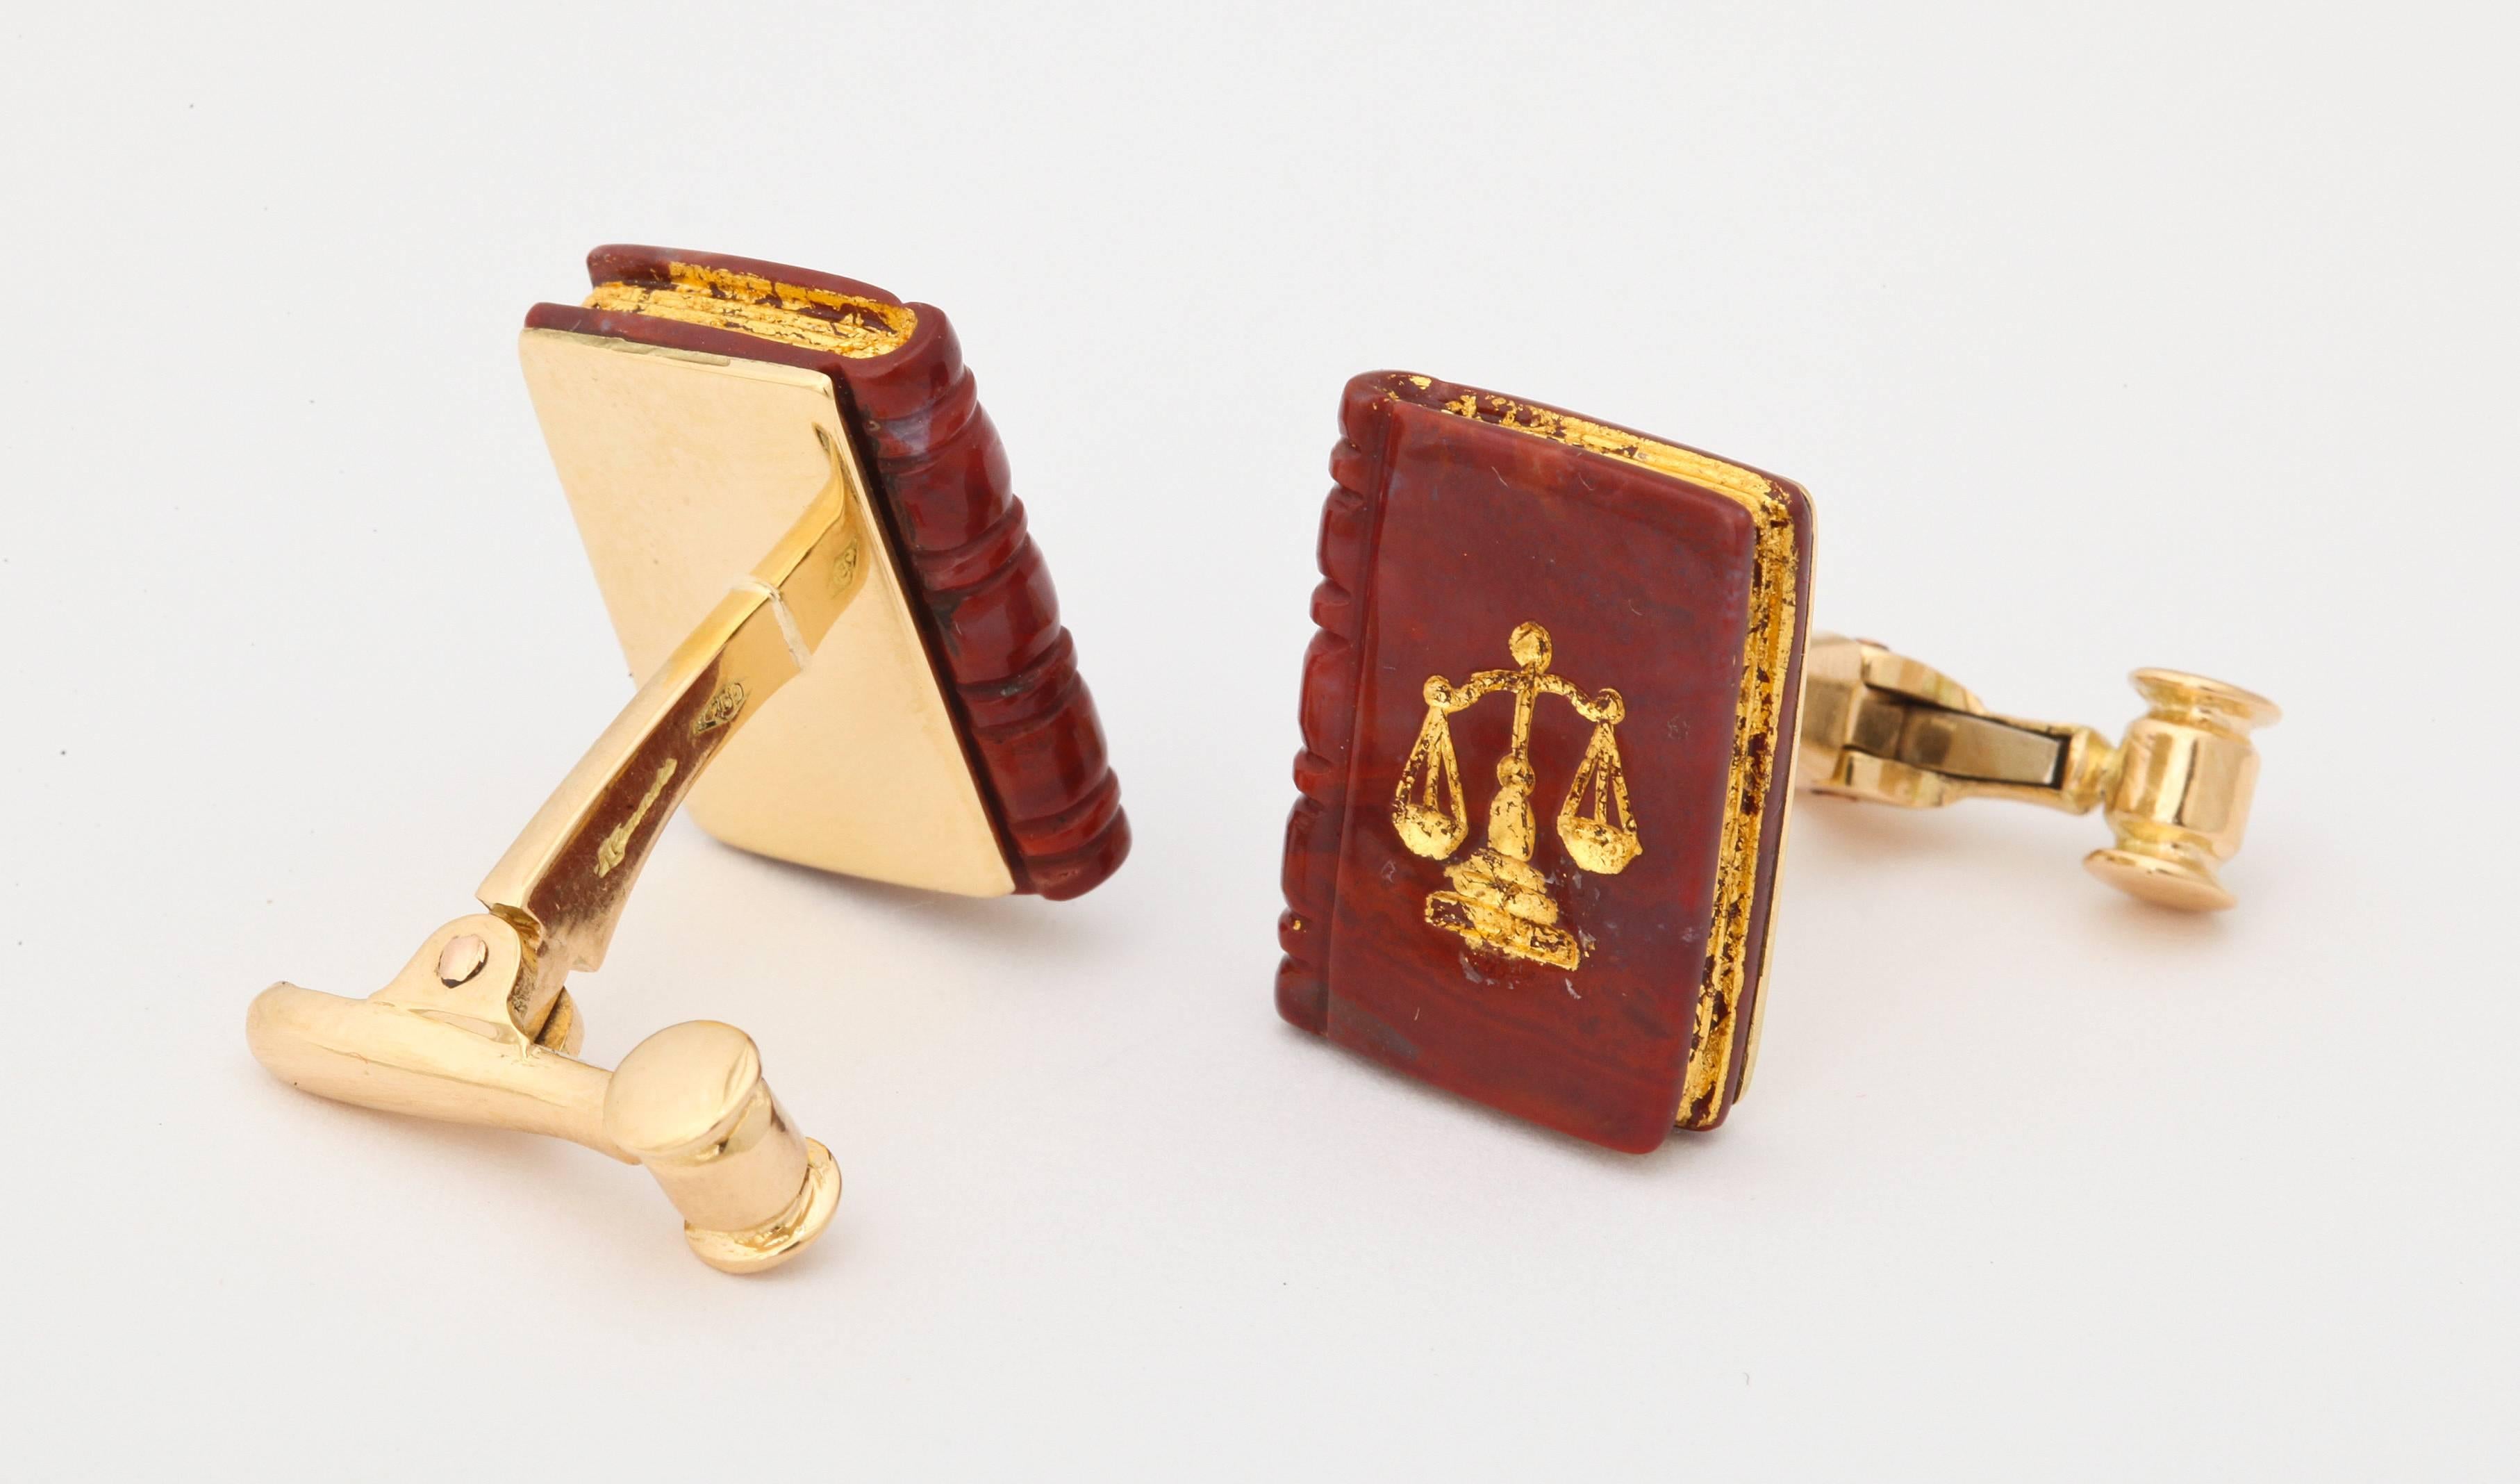  Michael Kanners  Carved Stone Legal Book Cufflinks 1